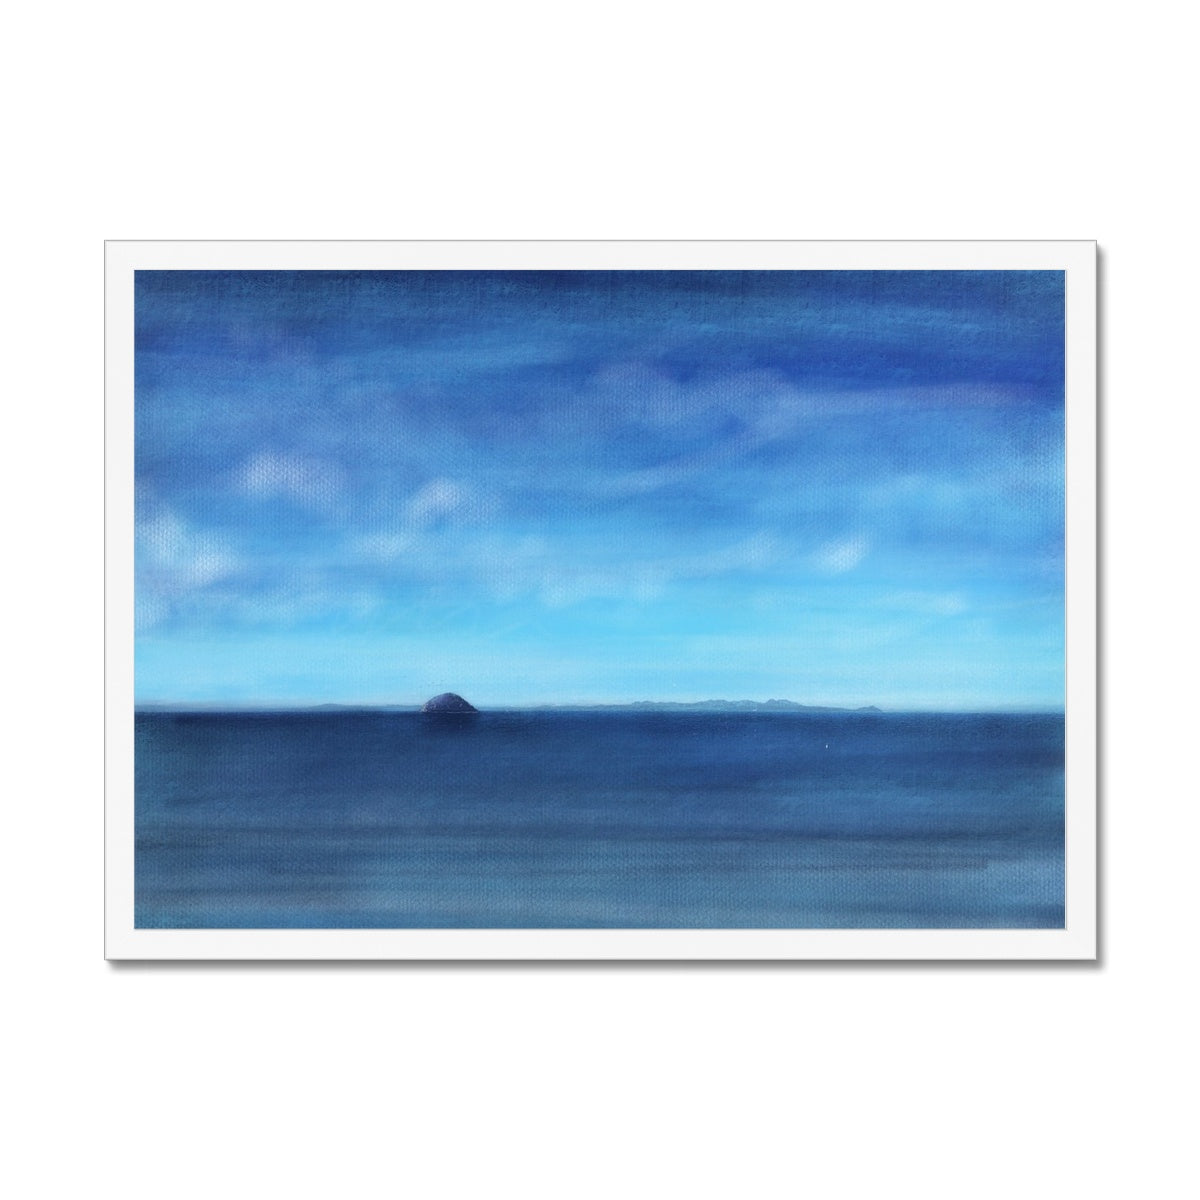 Ailsa Craig & Arran Painting | Framed Prints From Scotland-Framed Prints-Arran Art Gallery-A2 Landscape-White Frame-Paintings, Prints, Homeware, Art Gifts From Scotland By Scottish Artist Kevin Hunter